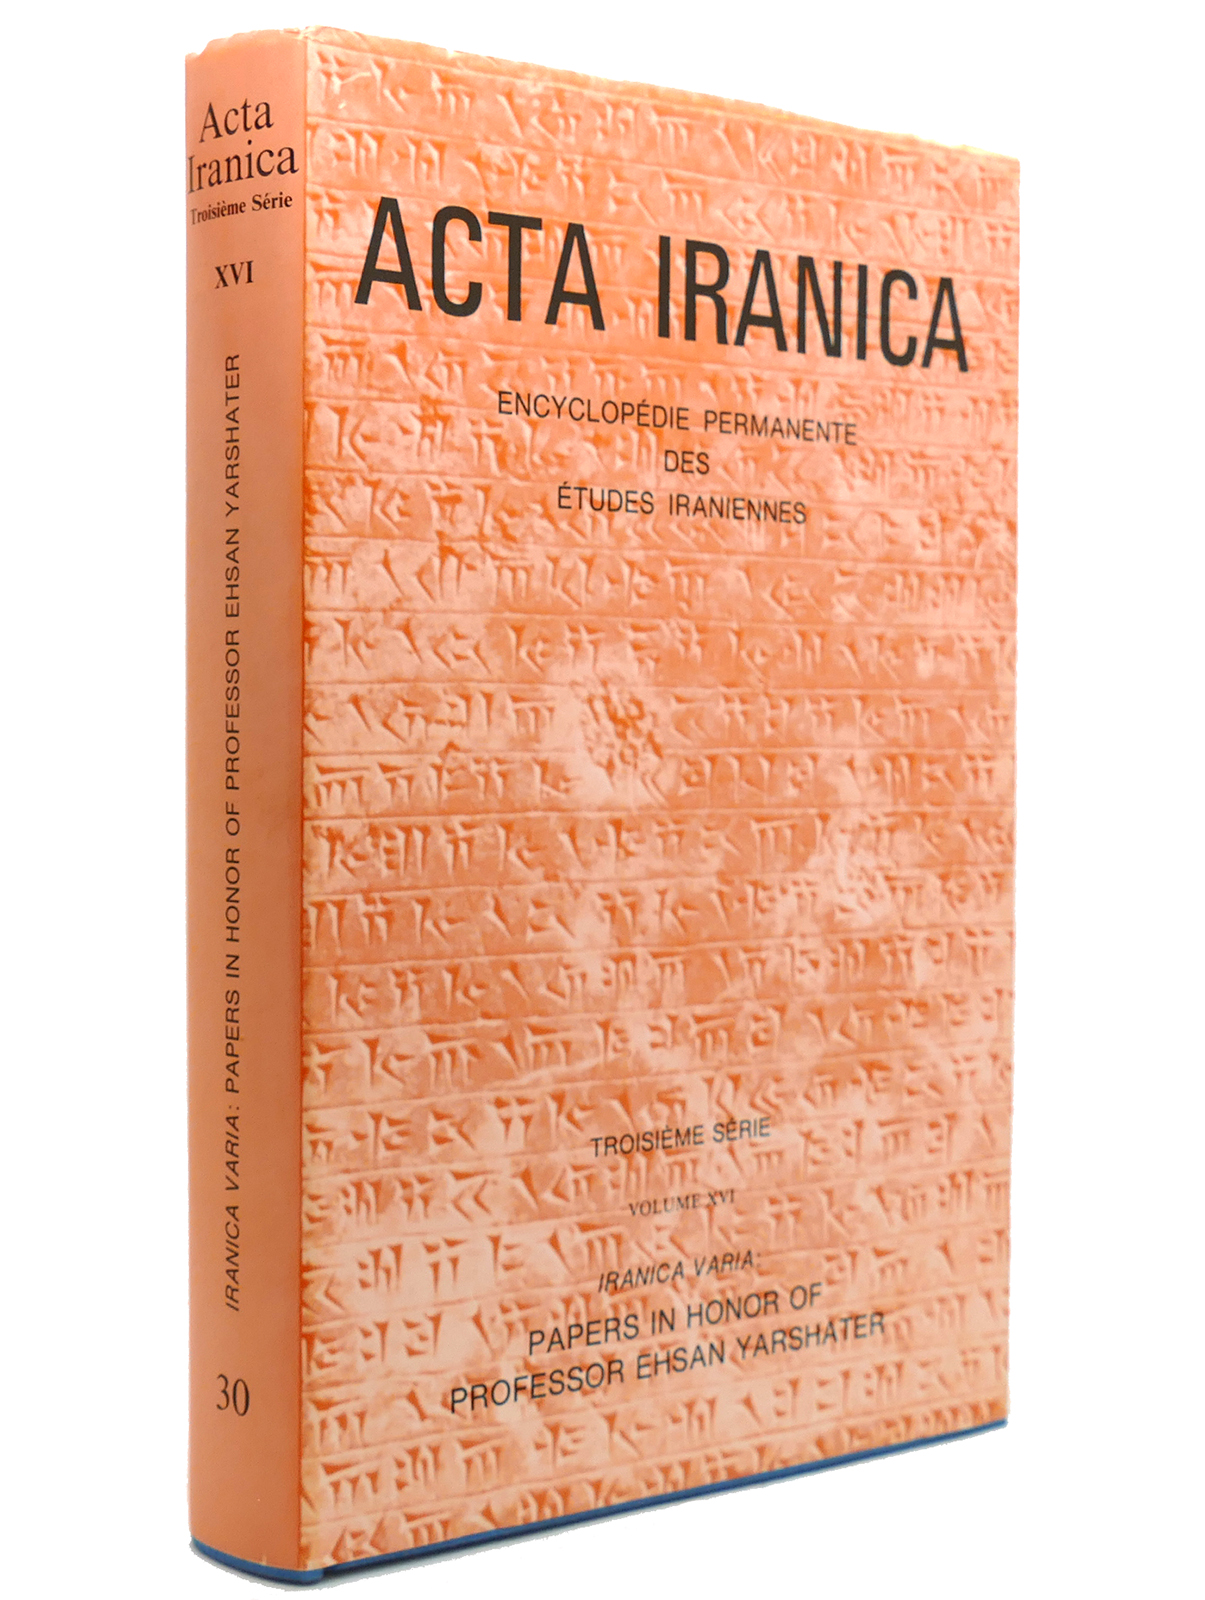 IRANICA VARIA Papers in Honor of Professor E. Yarshater. . : 016 (ACTA Iranica) - Peeters Publishers